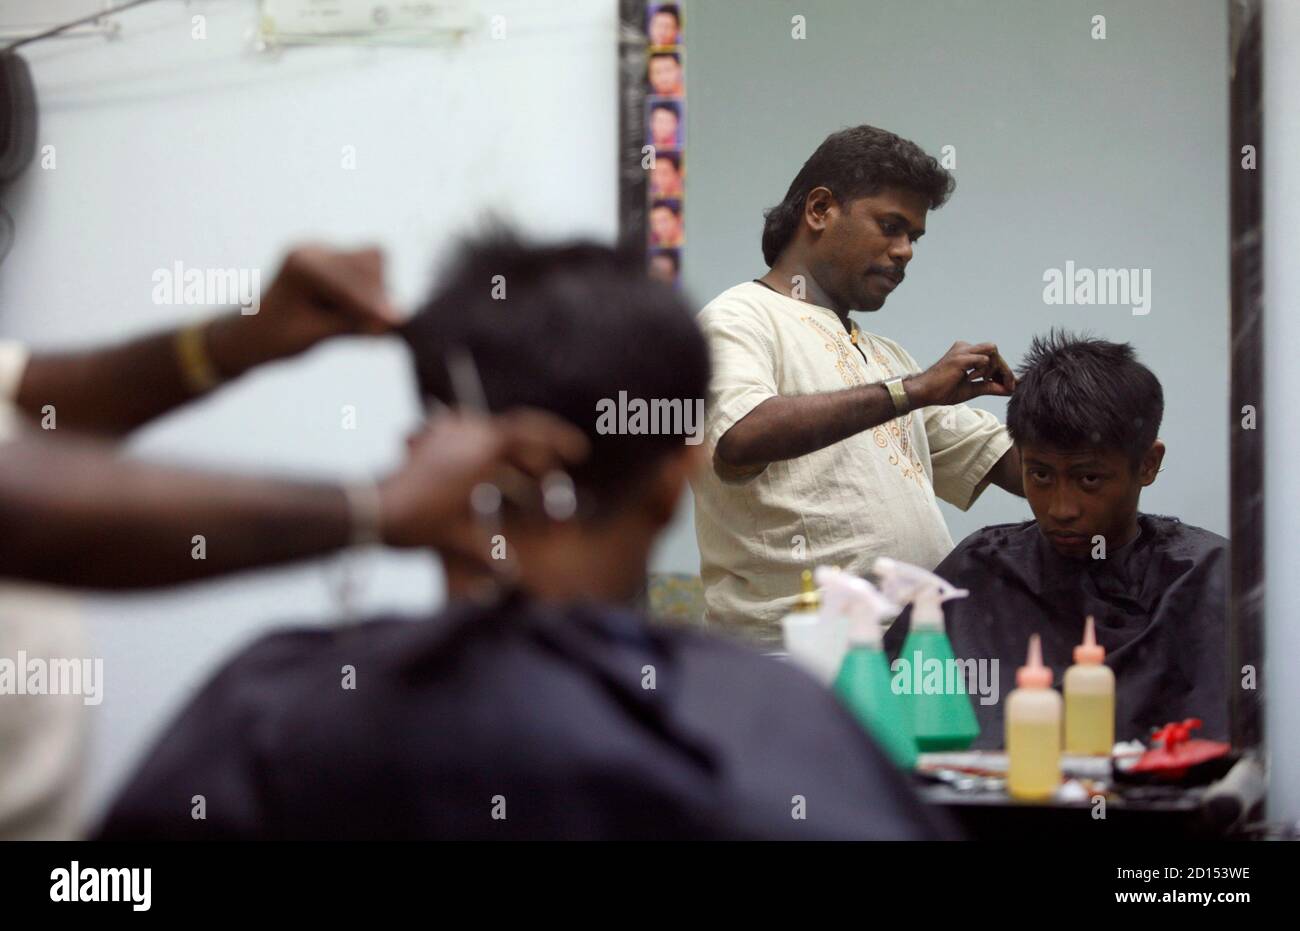 Mutu Mari, a foreign worker from India, is reflected in a mirror as he works at a barber shop in Putrajaya January 8, 2008. Malaysia has suspended the recruitment of workers from India and Bangladesh, the government said on Tuesday, in a move one official said could be linked to a recent uproar about Malaysia's treatment of its ethnic Indians.   REUTERS/Bazuki Muhammad (MALAYSIA) Stock Photo